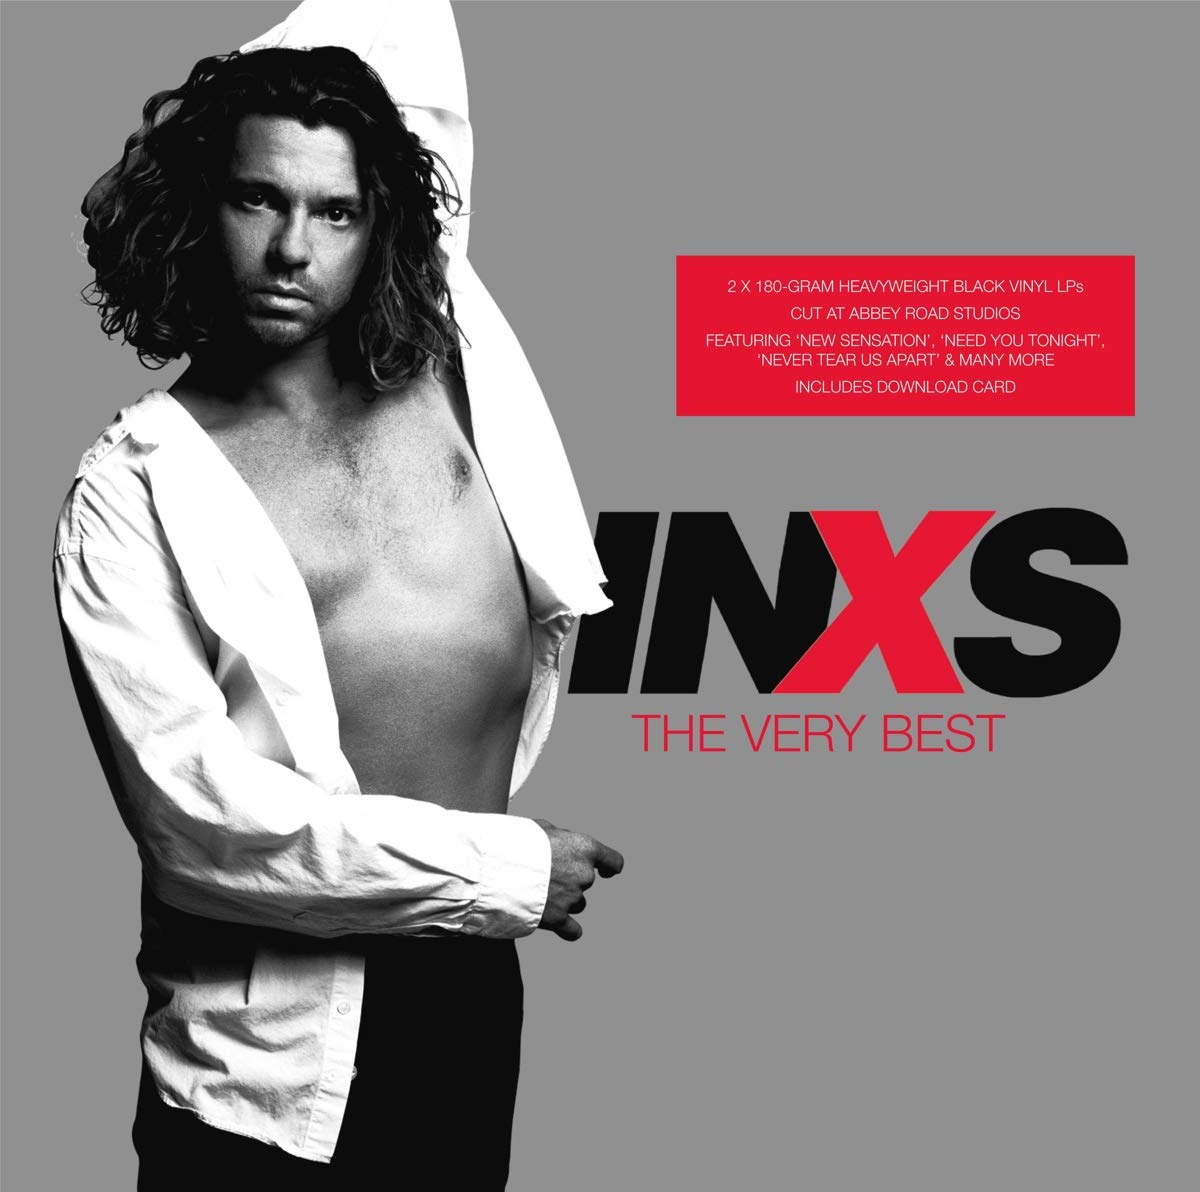 INXS – The Very Best (2011) [FLAC]